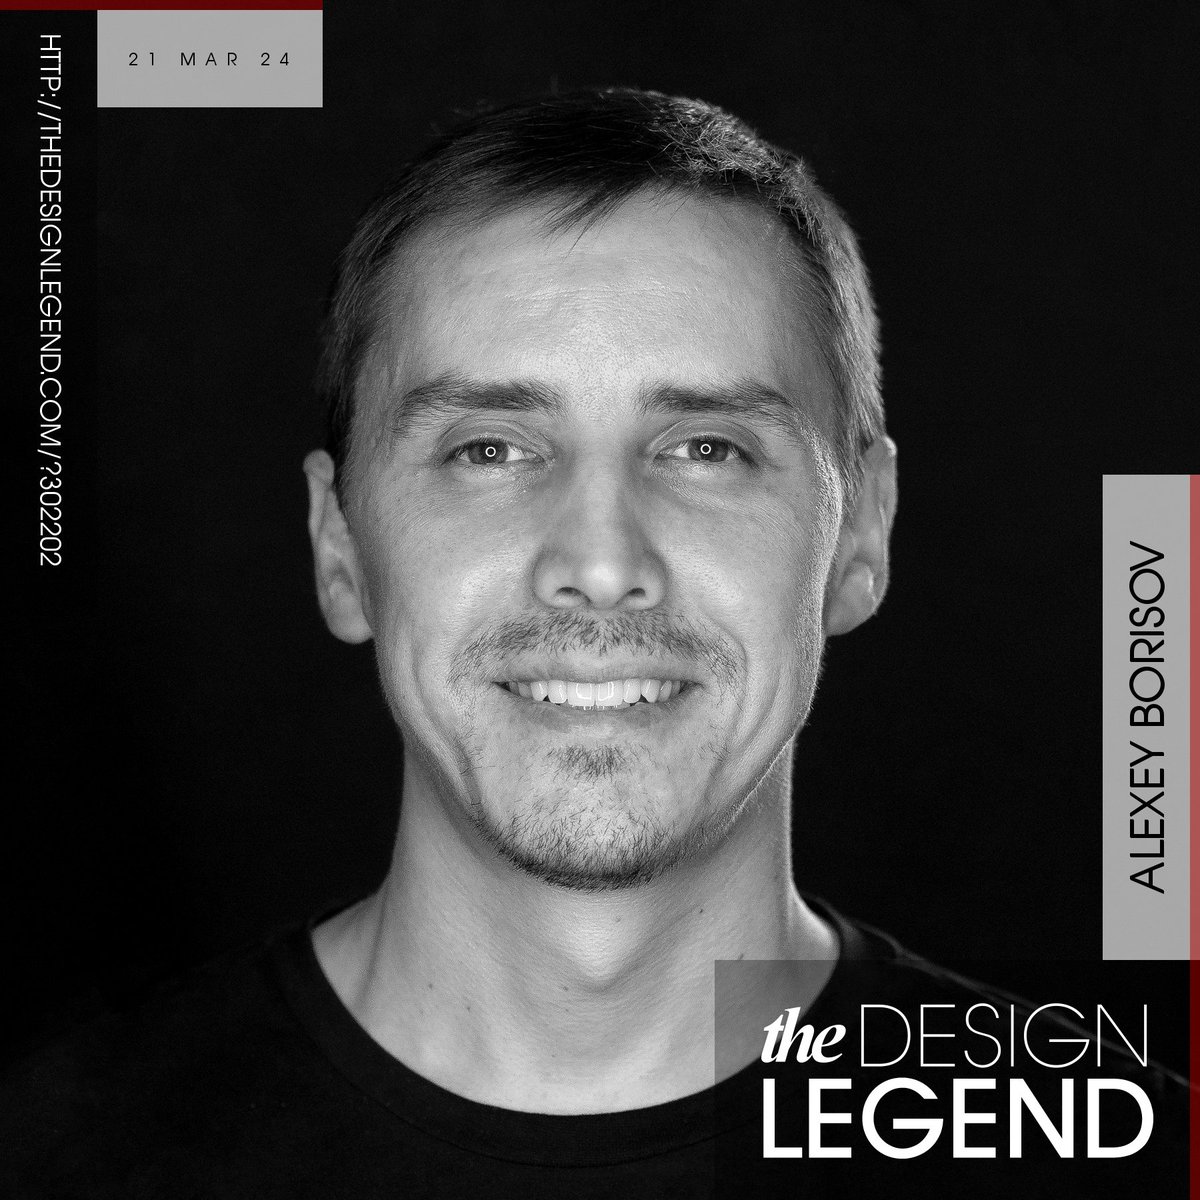 We are pleased to announce Alexey Borisov as the Design Legend of the Day of 21 March 2024. You should check Alexey Borisov's Design Legend interview at thedesignlegend.com/?302202 #adesignaward #adesigncompetition #designlegend